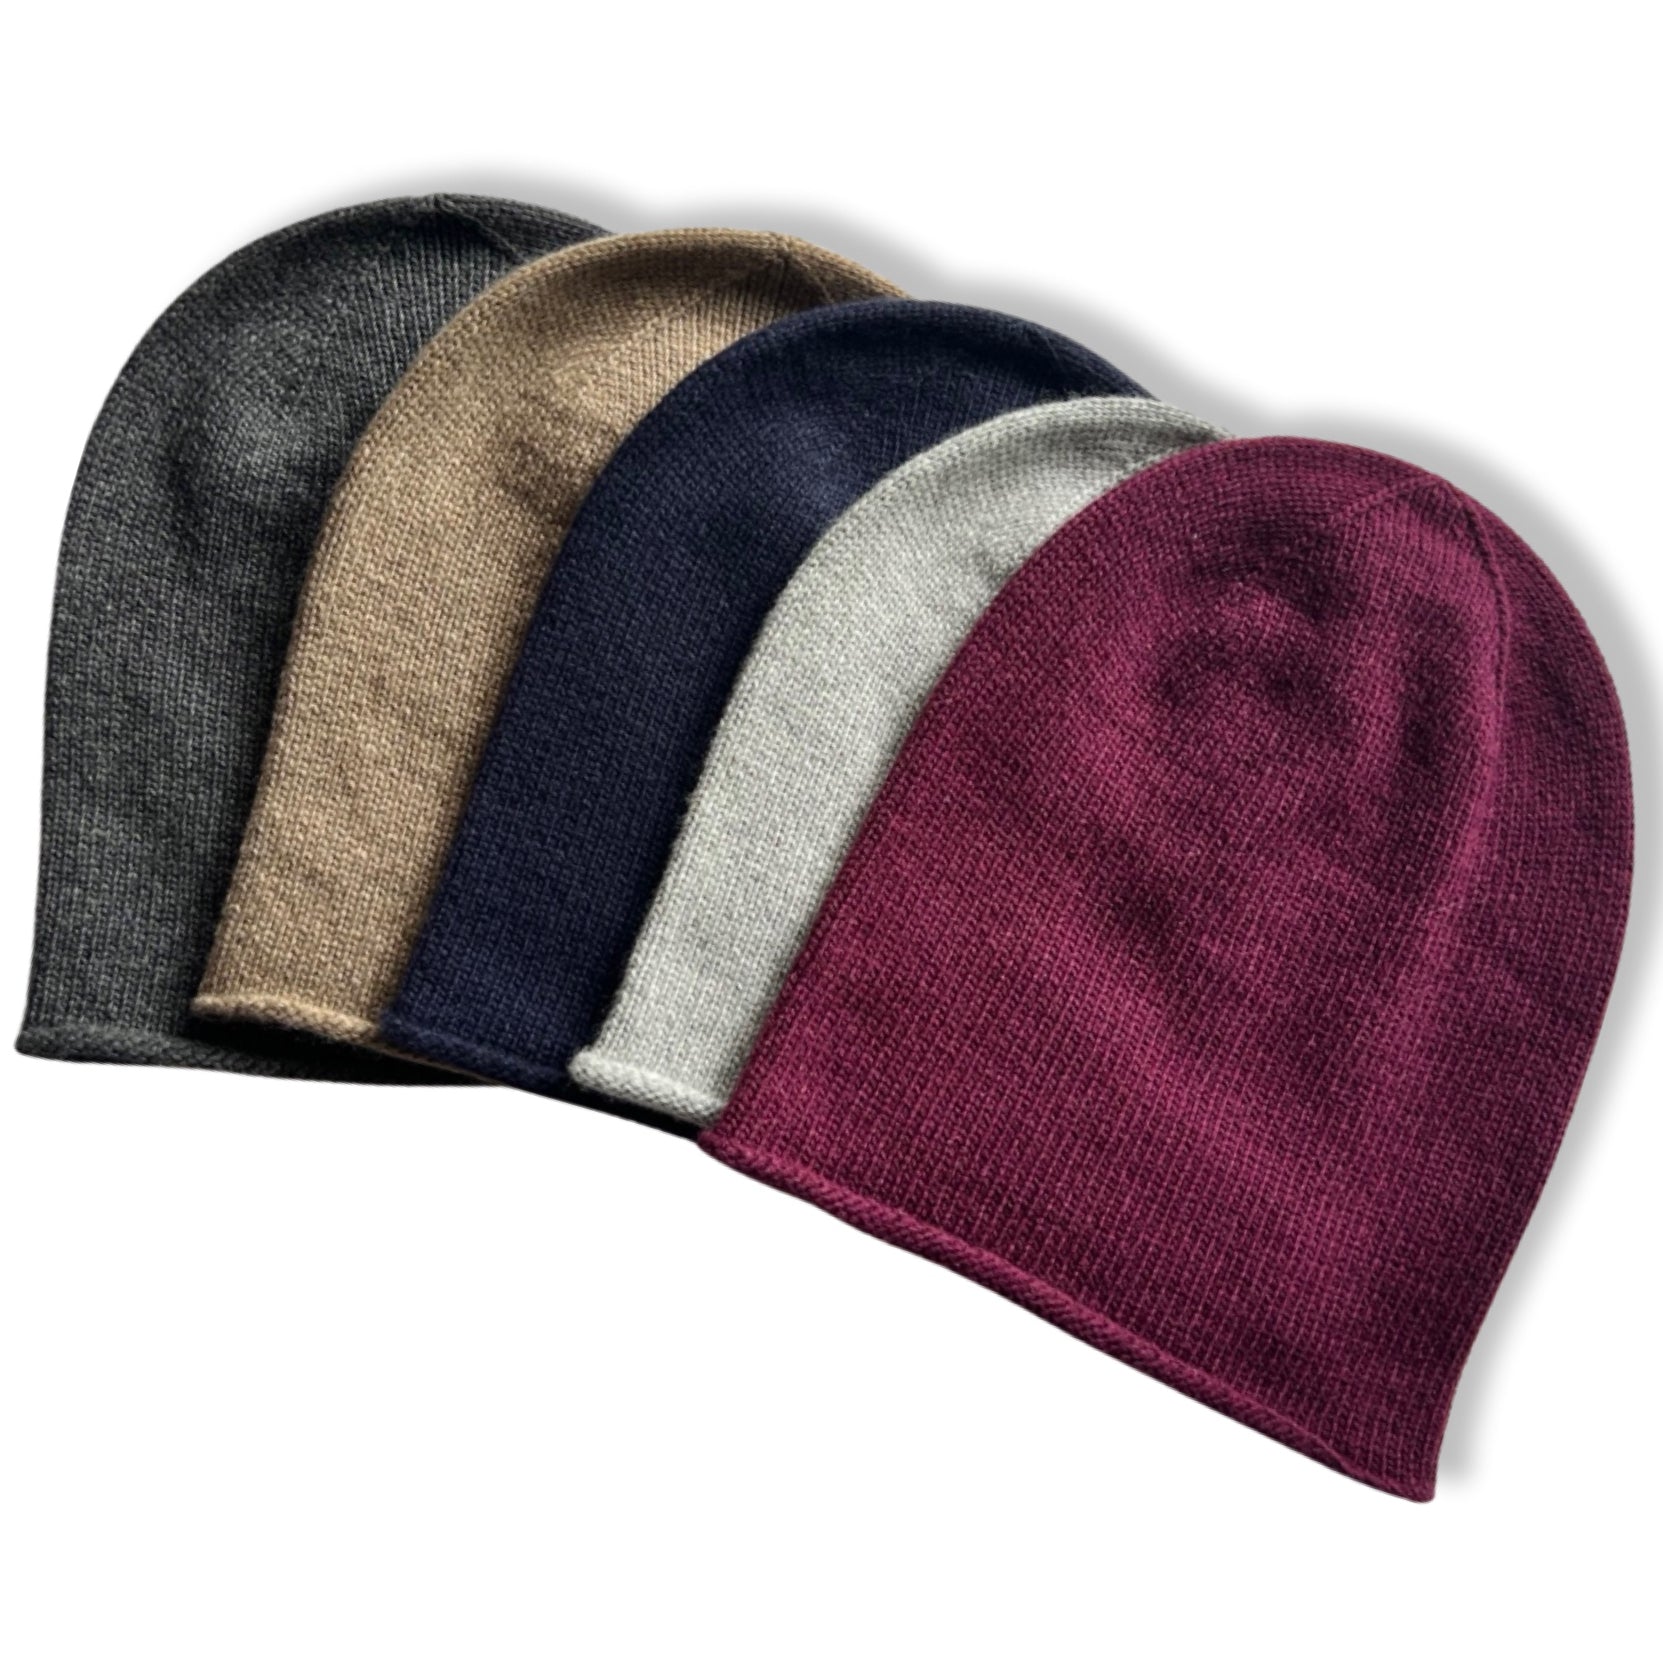 Rolled Edge Cashmere Beanie, Hats, Hickman & Bousfied - Hickman & Bousfield, Safari and Travel Clothing